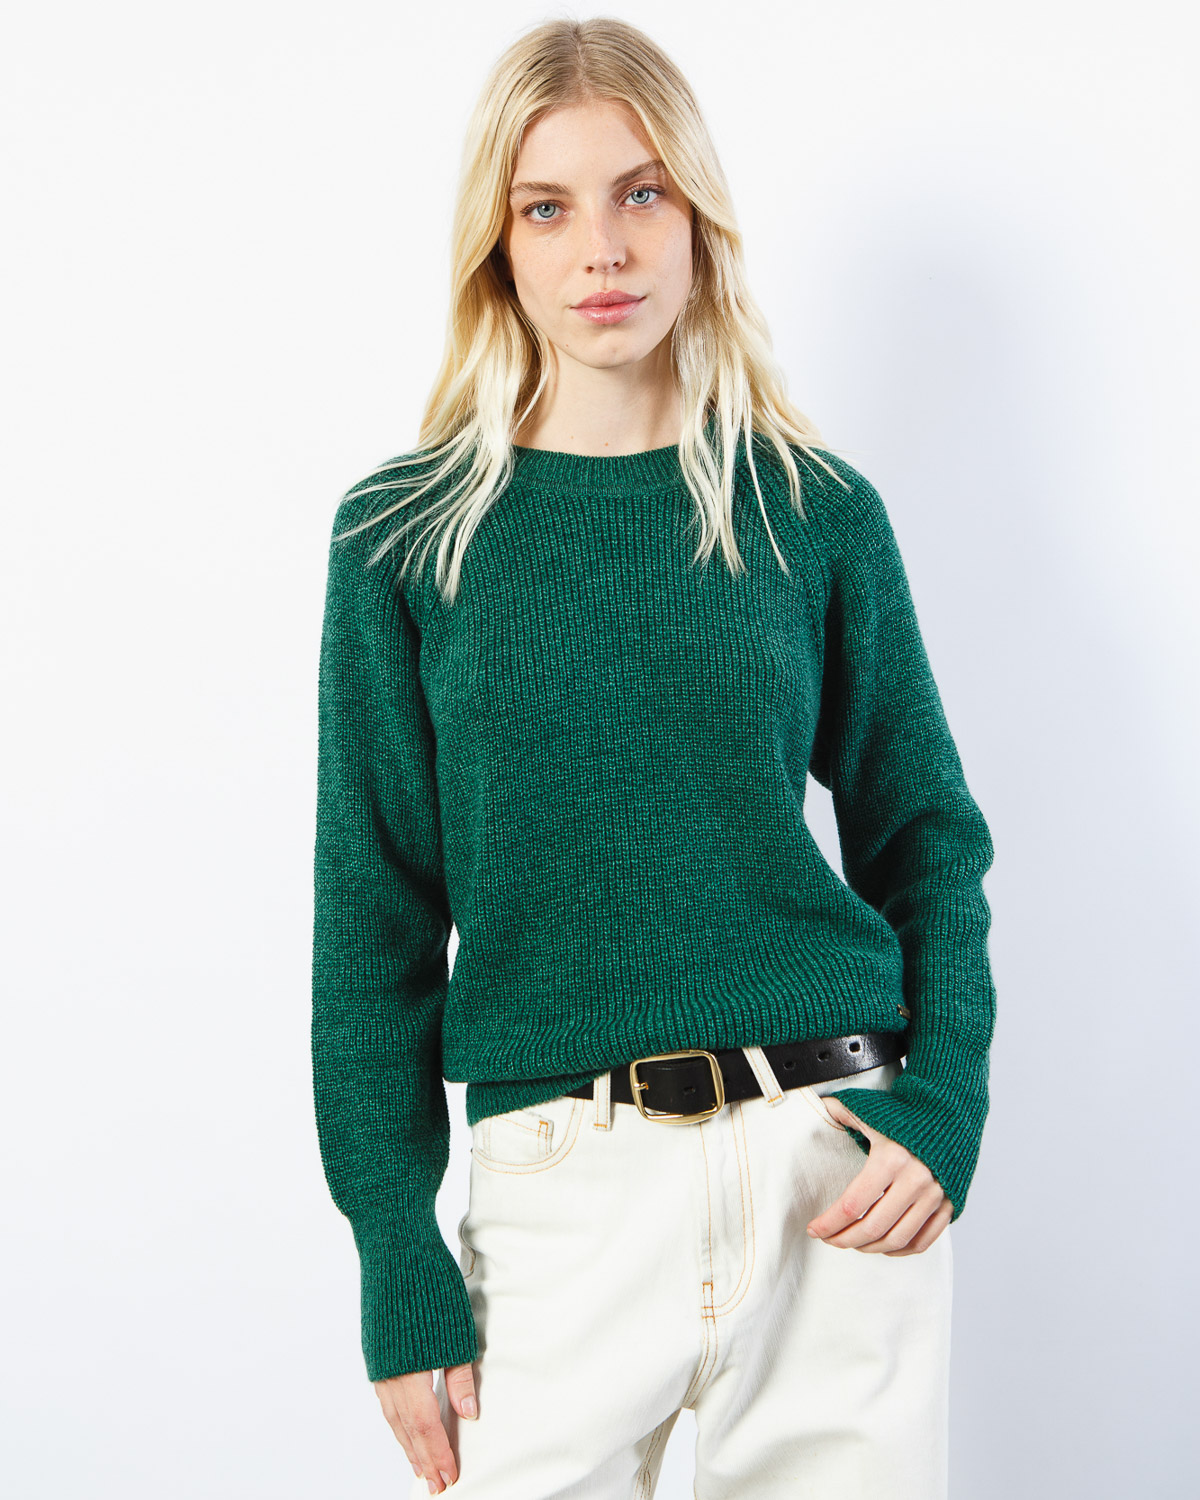 wanama_sweater-lucie-_59-19-2022__picture-24350